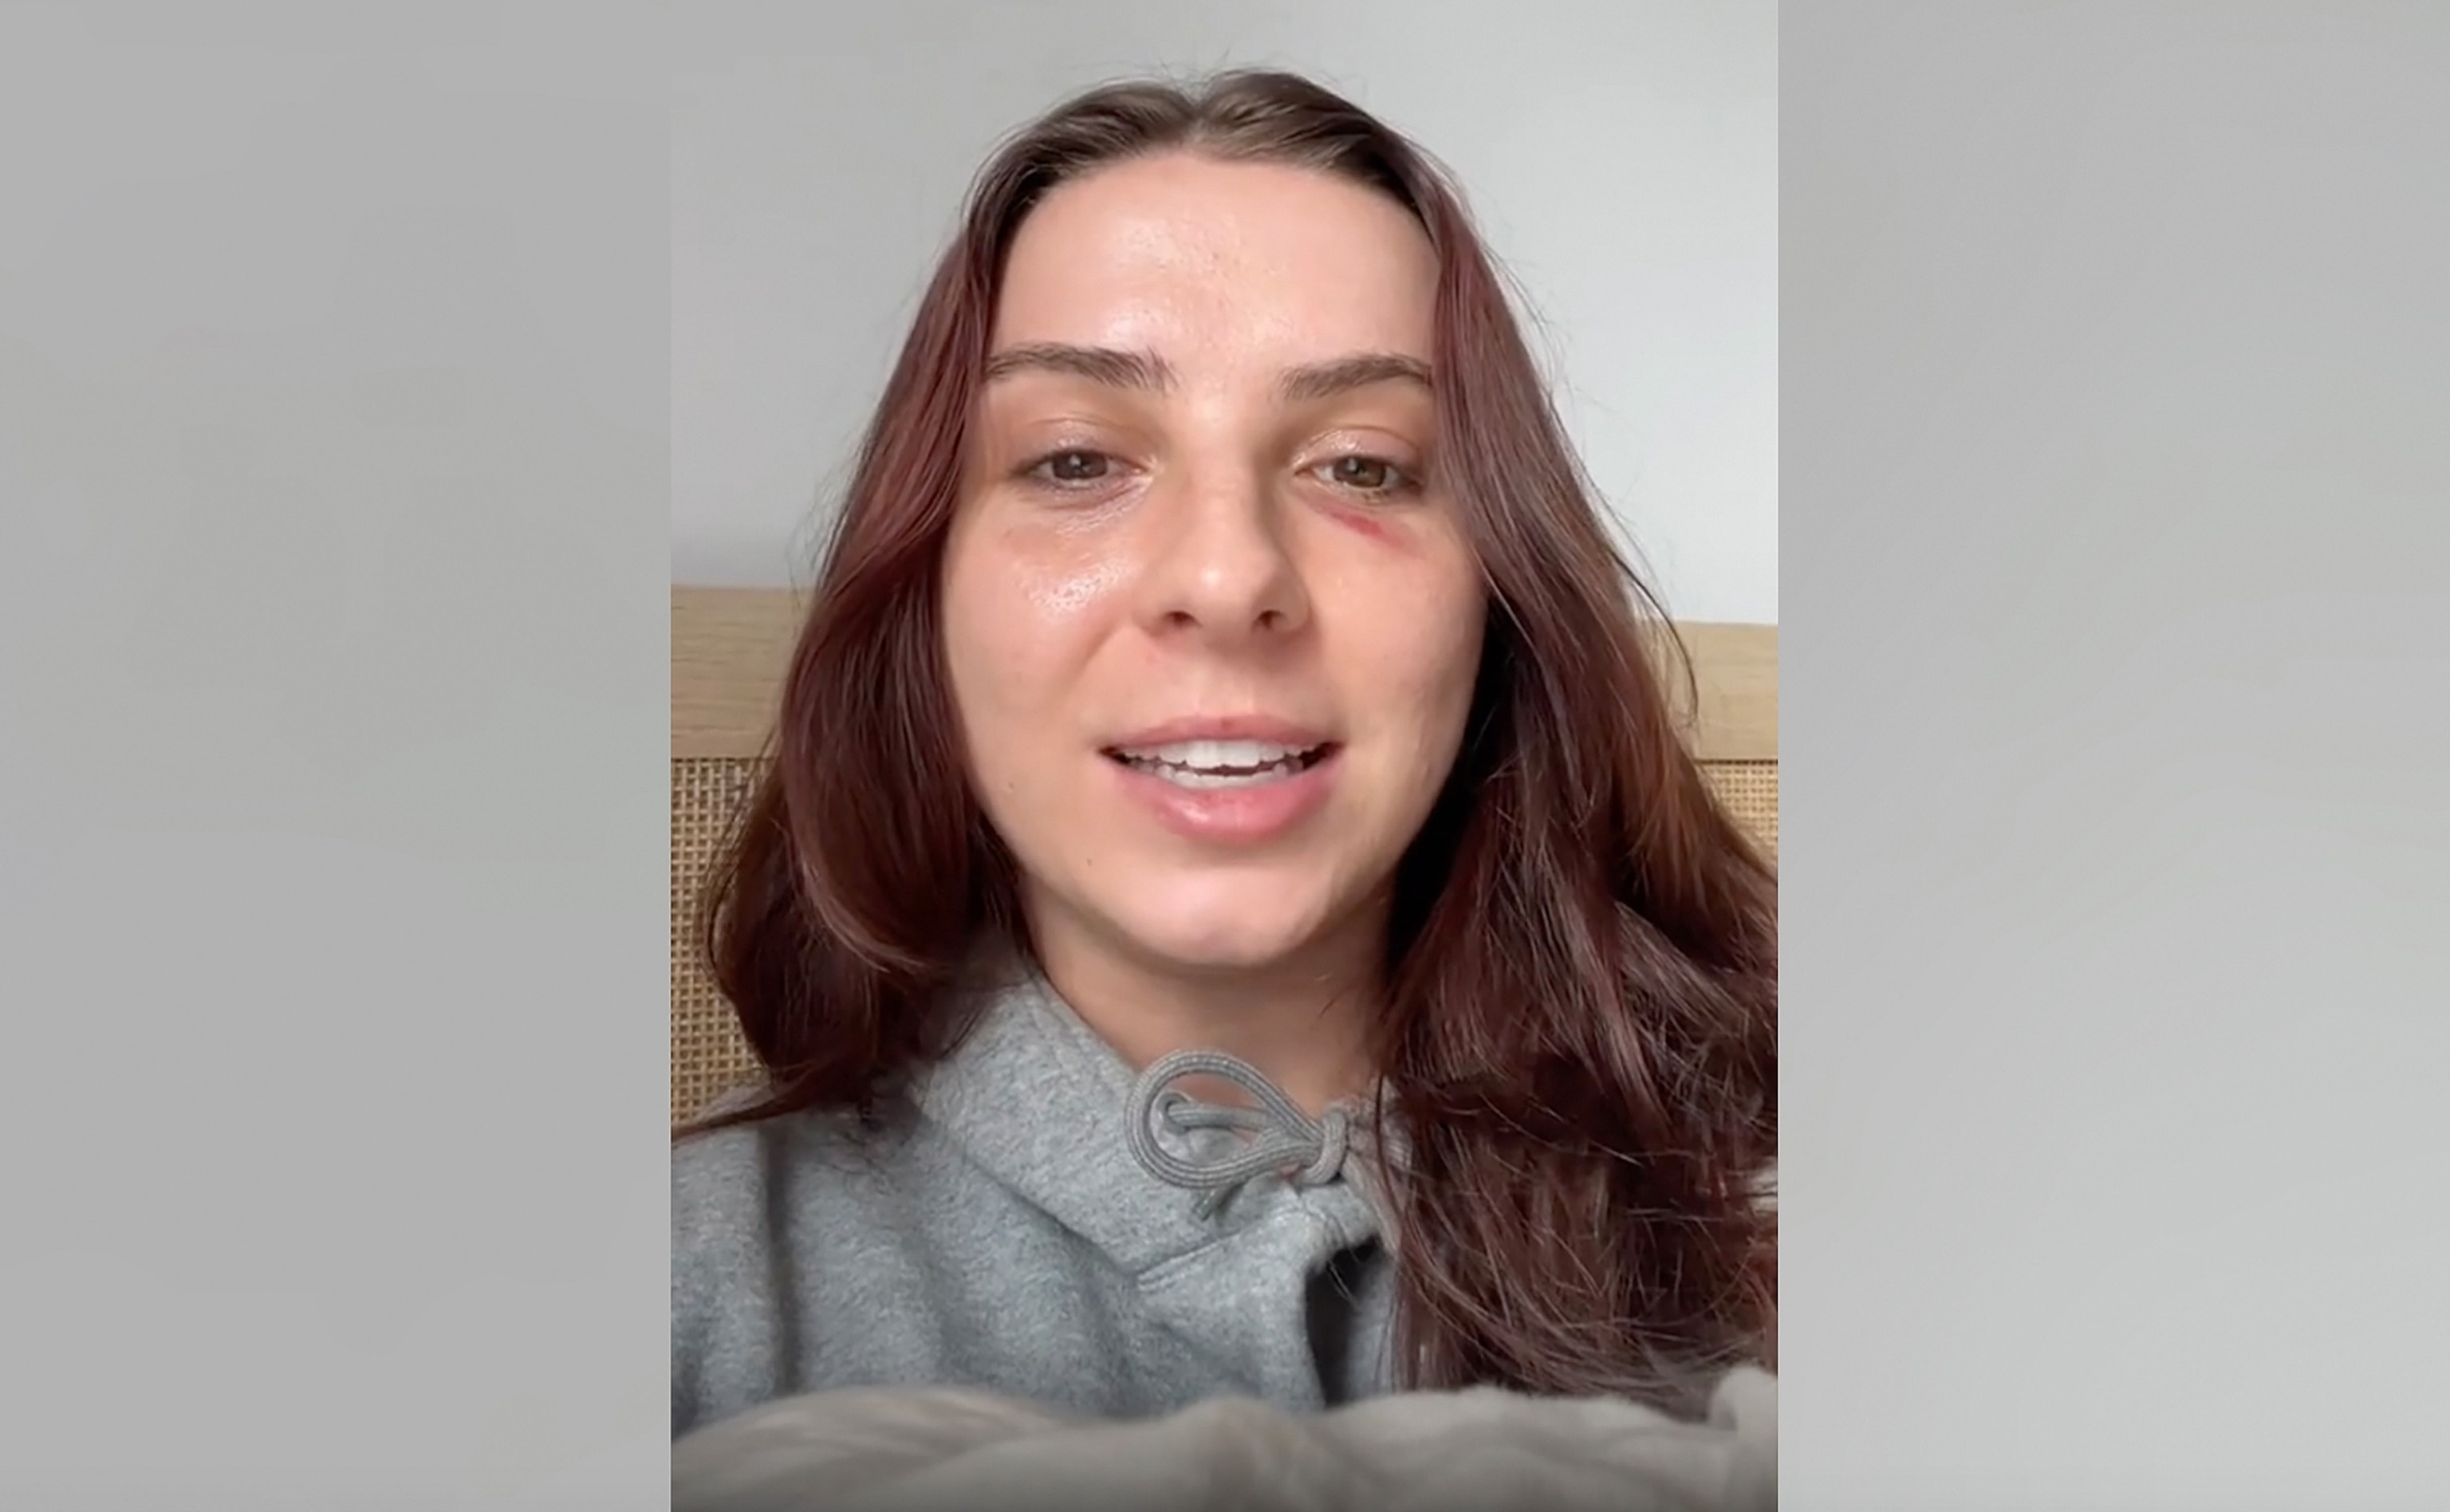 PHOTO: Mikayla Toninato speaks in a posting on her Tik Tok account recounting an incident where she was struck in the face while walking in the streets of New York City.